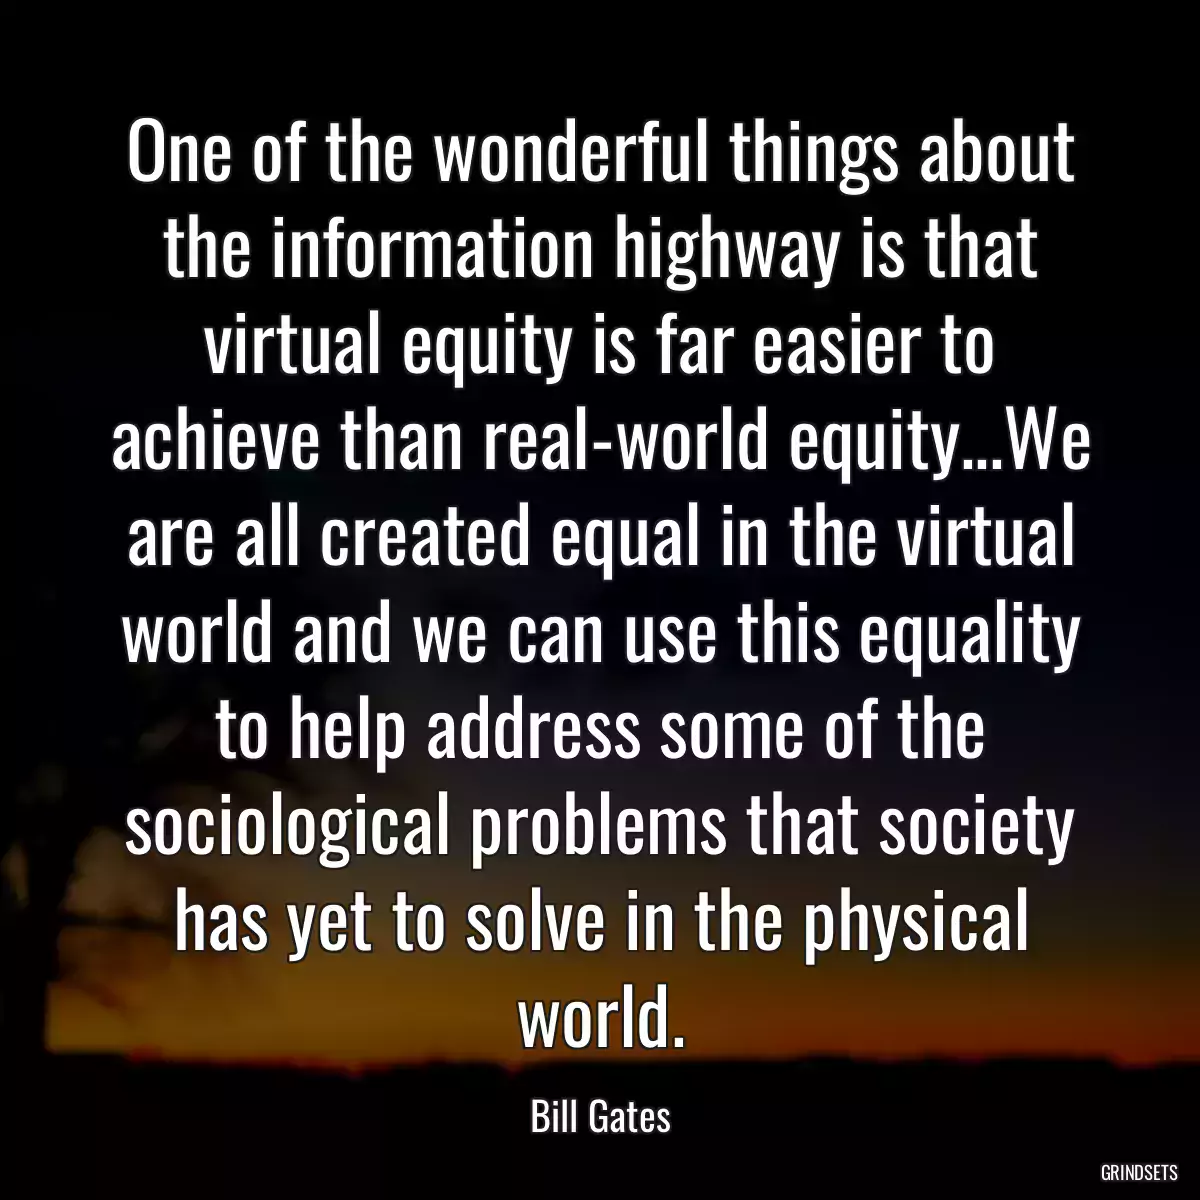 One of the wonderful things about the information highway is that virtual equity is far easier to achieve than real-world equity...We are all created equal in the virtual world and we can use this equality to help address some of the sociological problems that society has yet to solve in the physical world.